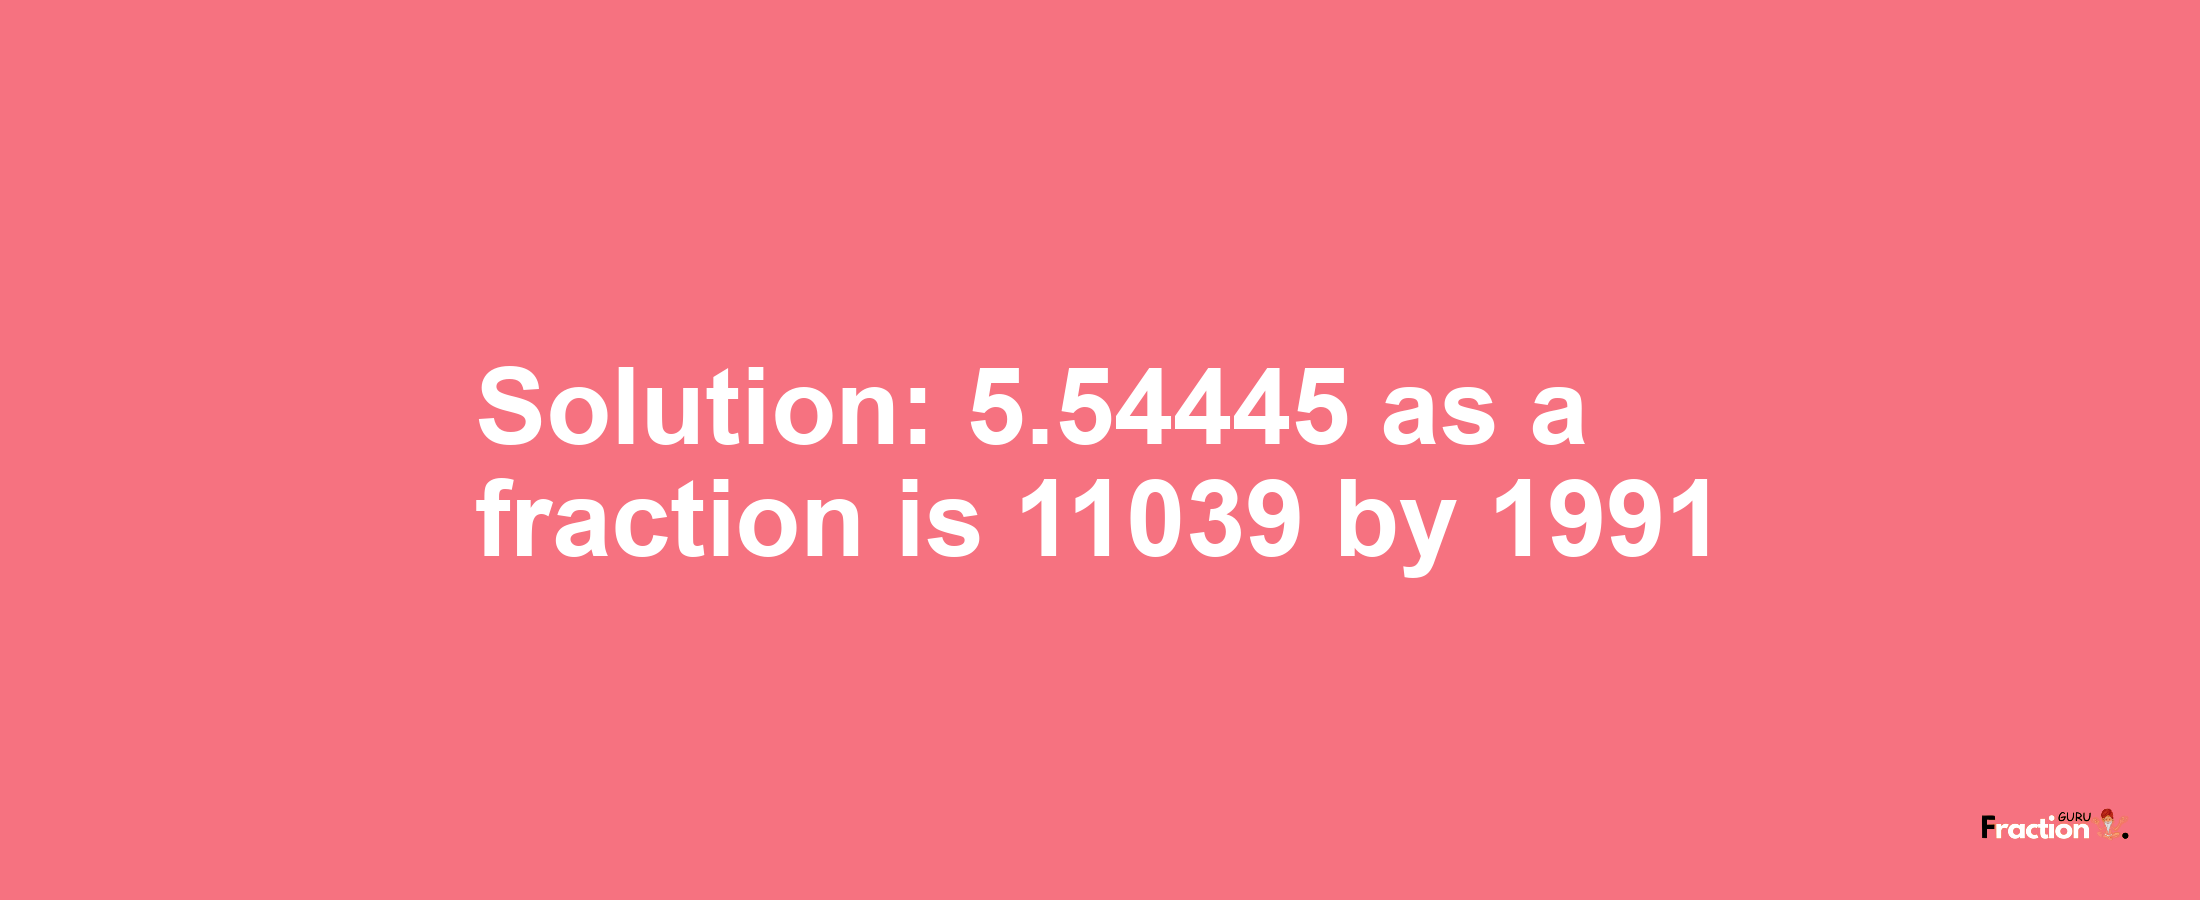 Solution:5.54445 as a fraction is 11039/1991